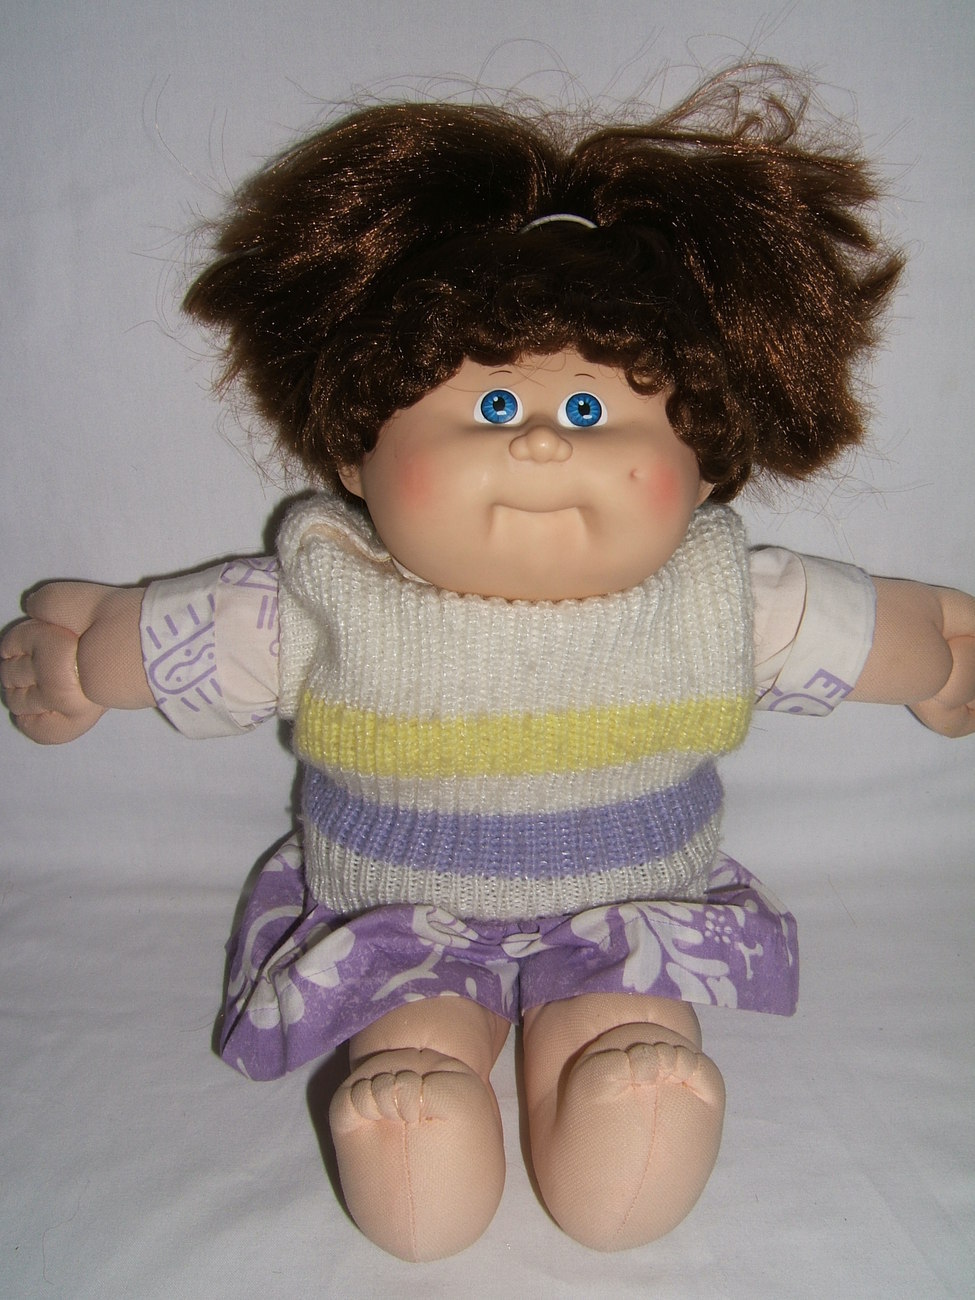 1986 cabbage patch doll